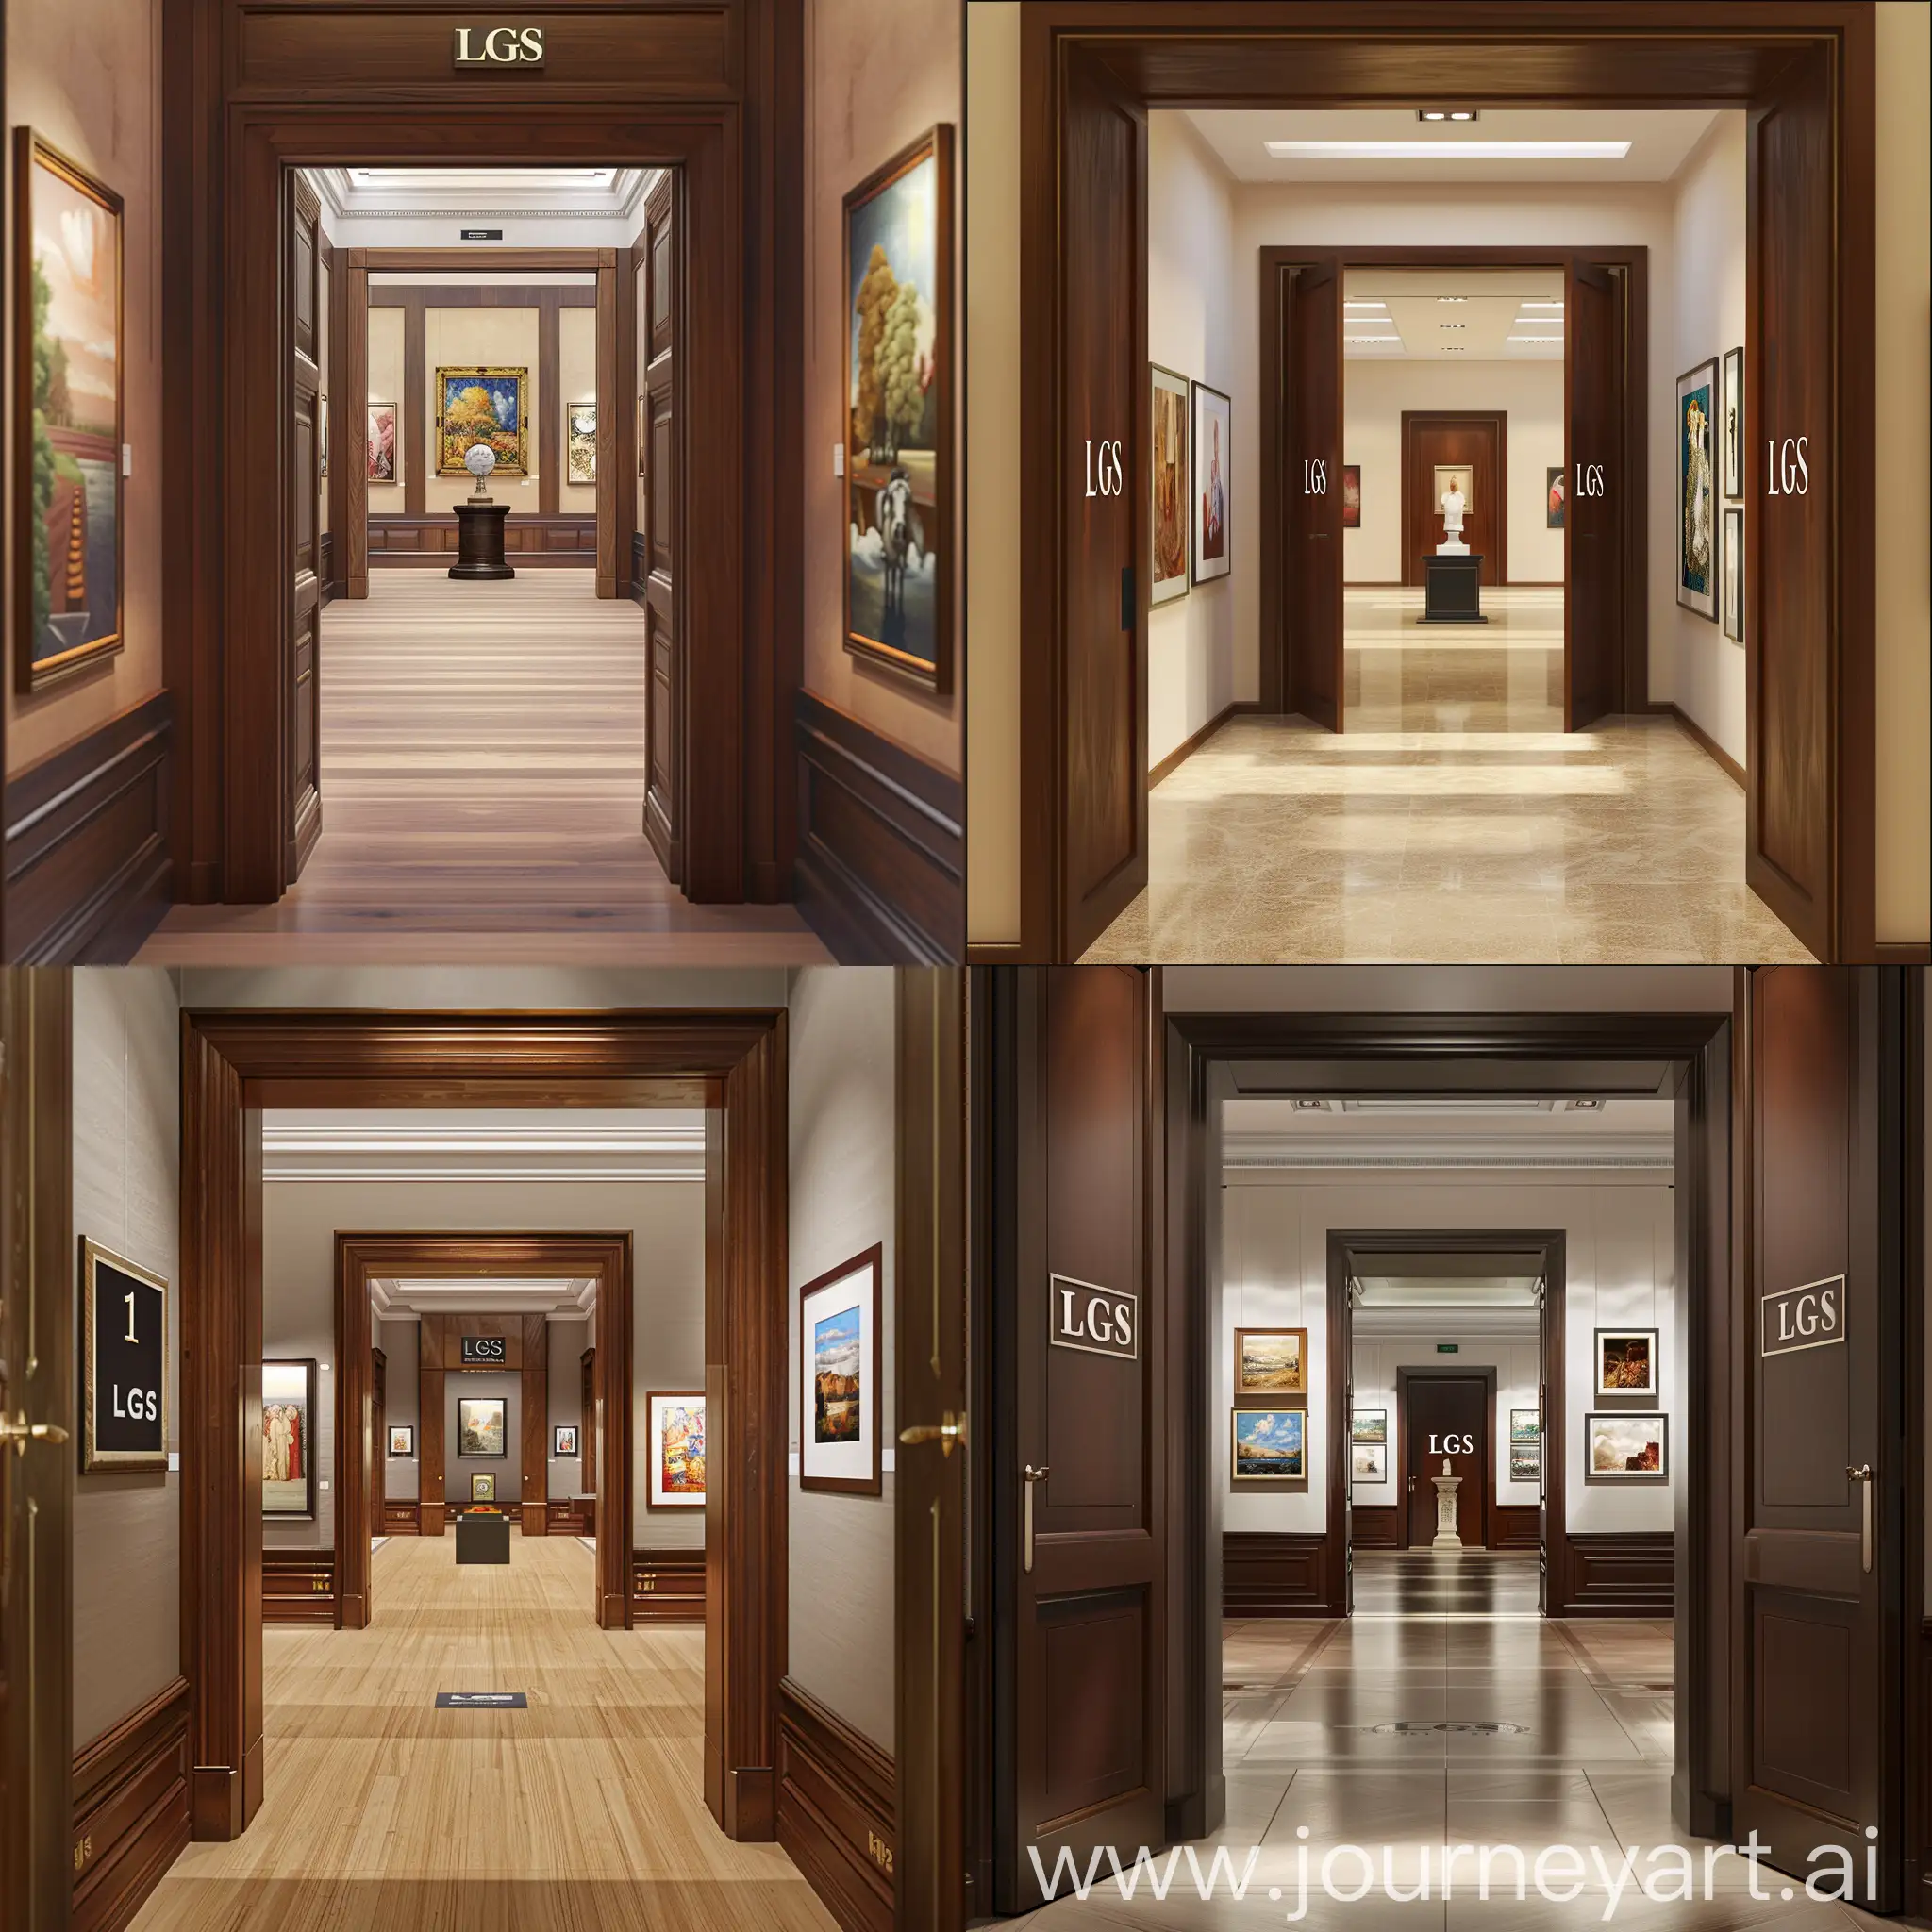 Modern-Art-Gallery-Showcase-with-LGS-Entrance-and-Spacious-Hall